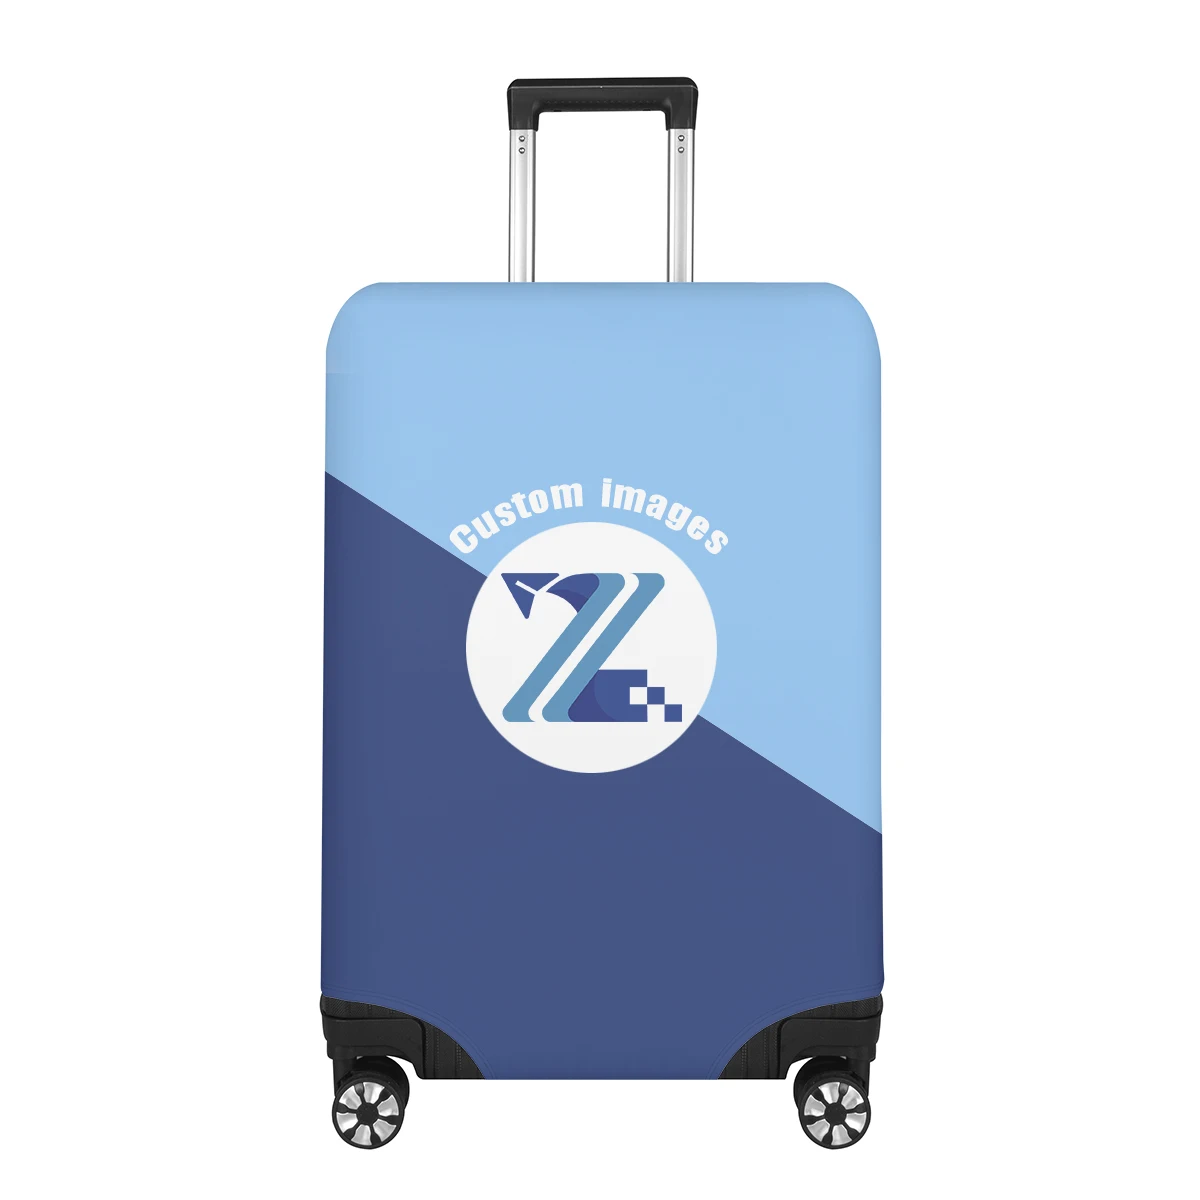 Wholesale Price Luggage Cover Custom Design 3d Print Elastic Spandex Suitcase  Protector Washable Baggage Covers For Traveling - Buy Luggage Cover,Luggage  Cover Custom Design,Luggage Cover Protector Product on Alibaba.com